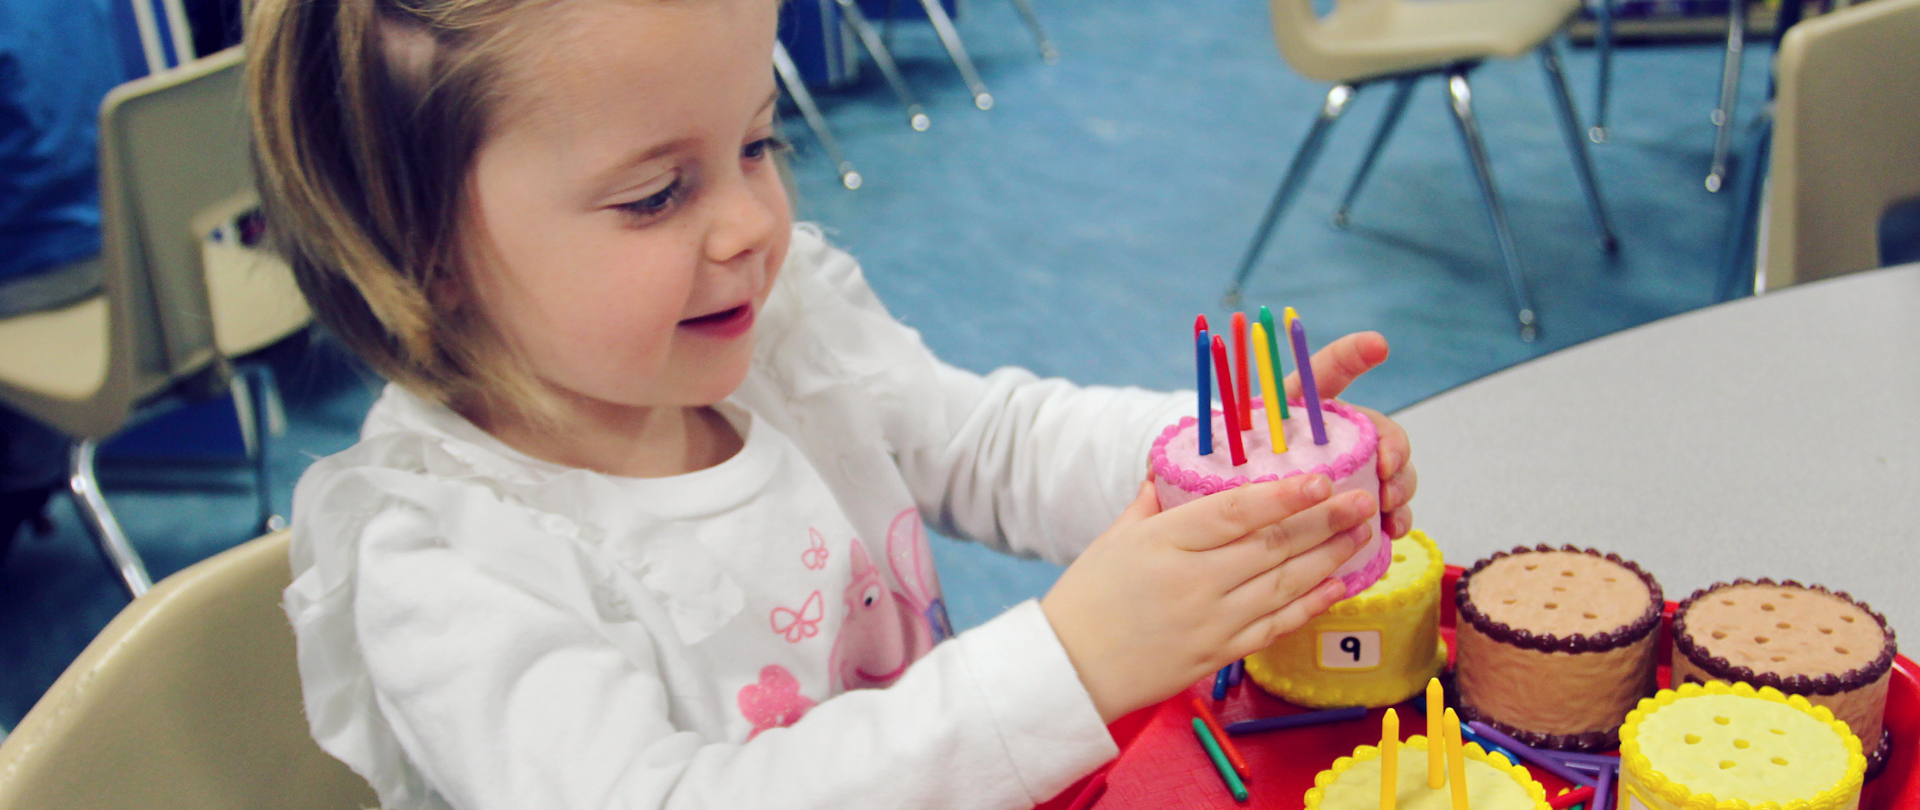 Daycare & Preschool Programs
Full-day & Half-day Options
for Ages 2–4
